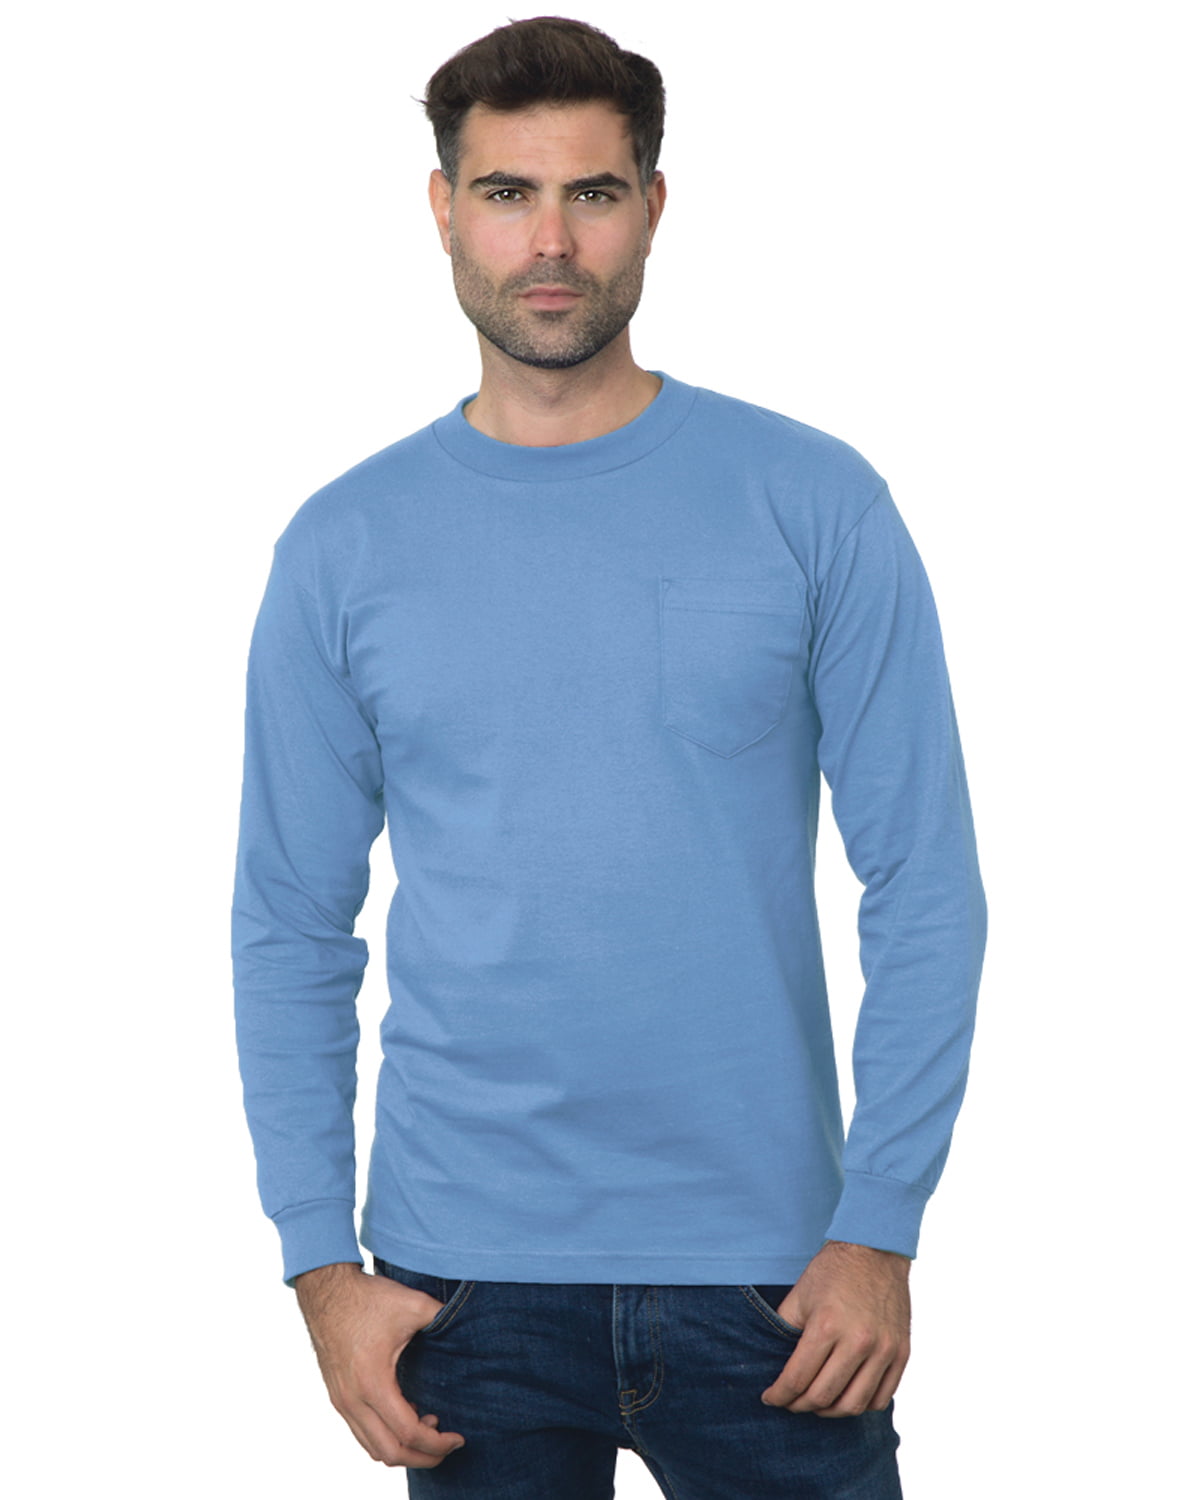 Bayside Apparel Union-Made Long Sleeve T-Shirt with a Pocket L/Lime Green